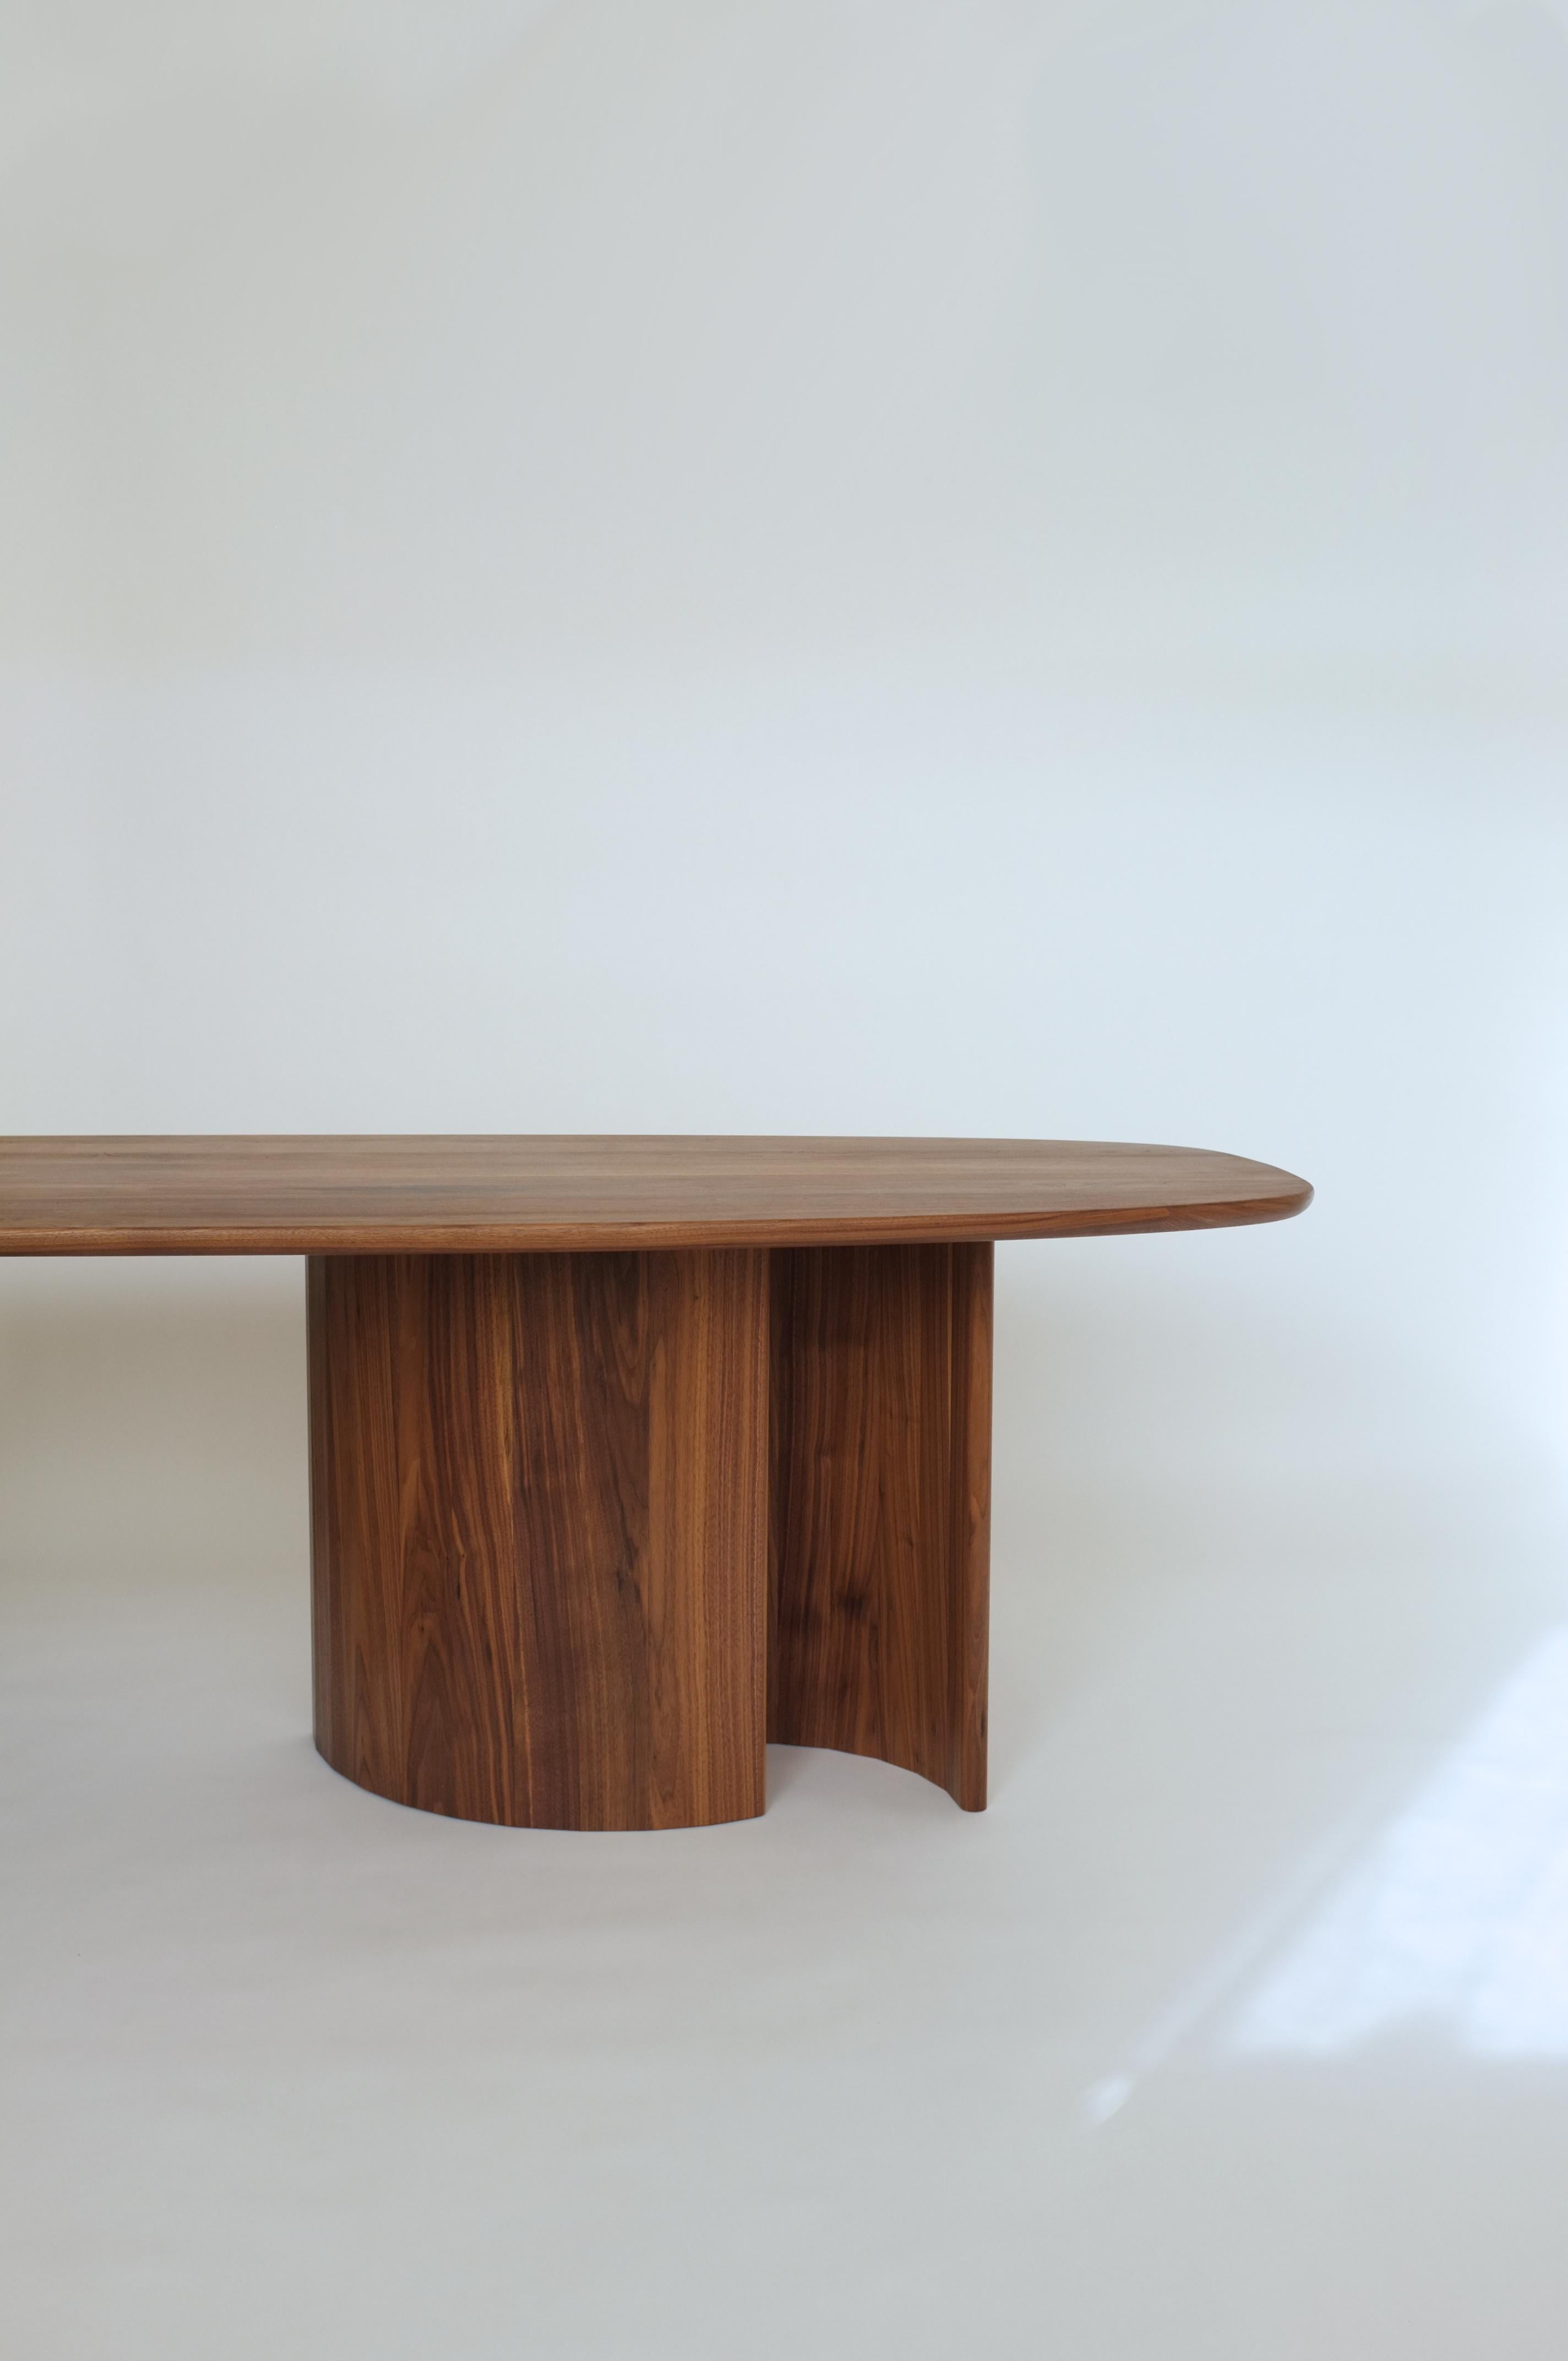 Dining table for Richard by Campagna in walnut.

This sculptural, contemporary wooden dining table features a free flowing, organic top and faceted, arc-shaped legs. The interaction of the three uniquely curved legs creates moments of shifting